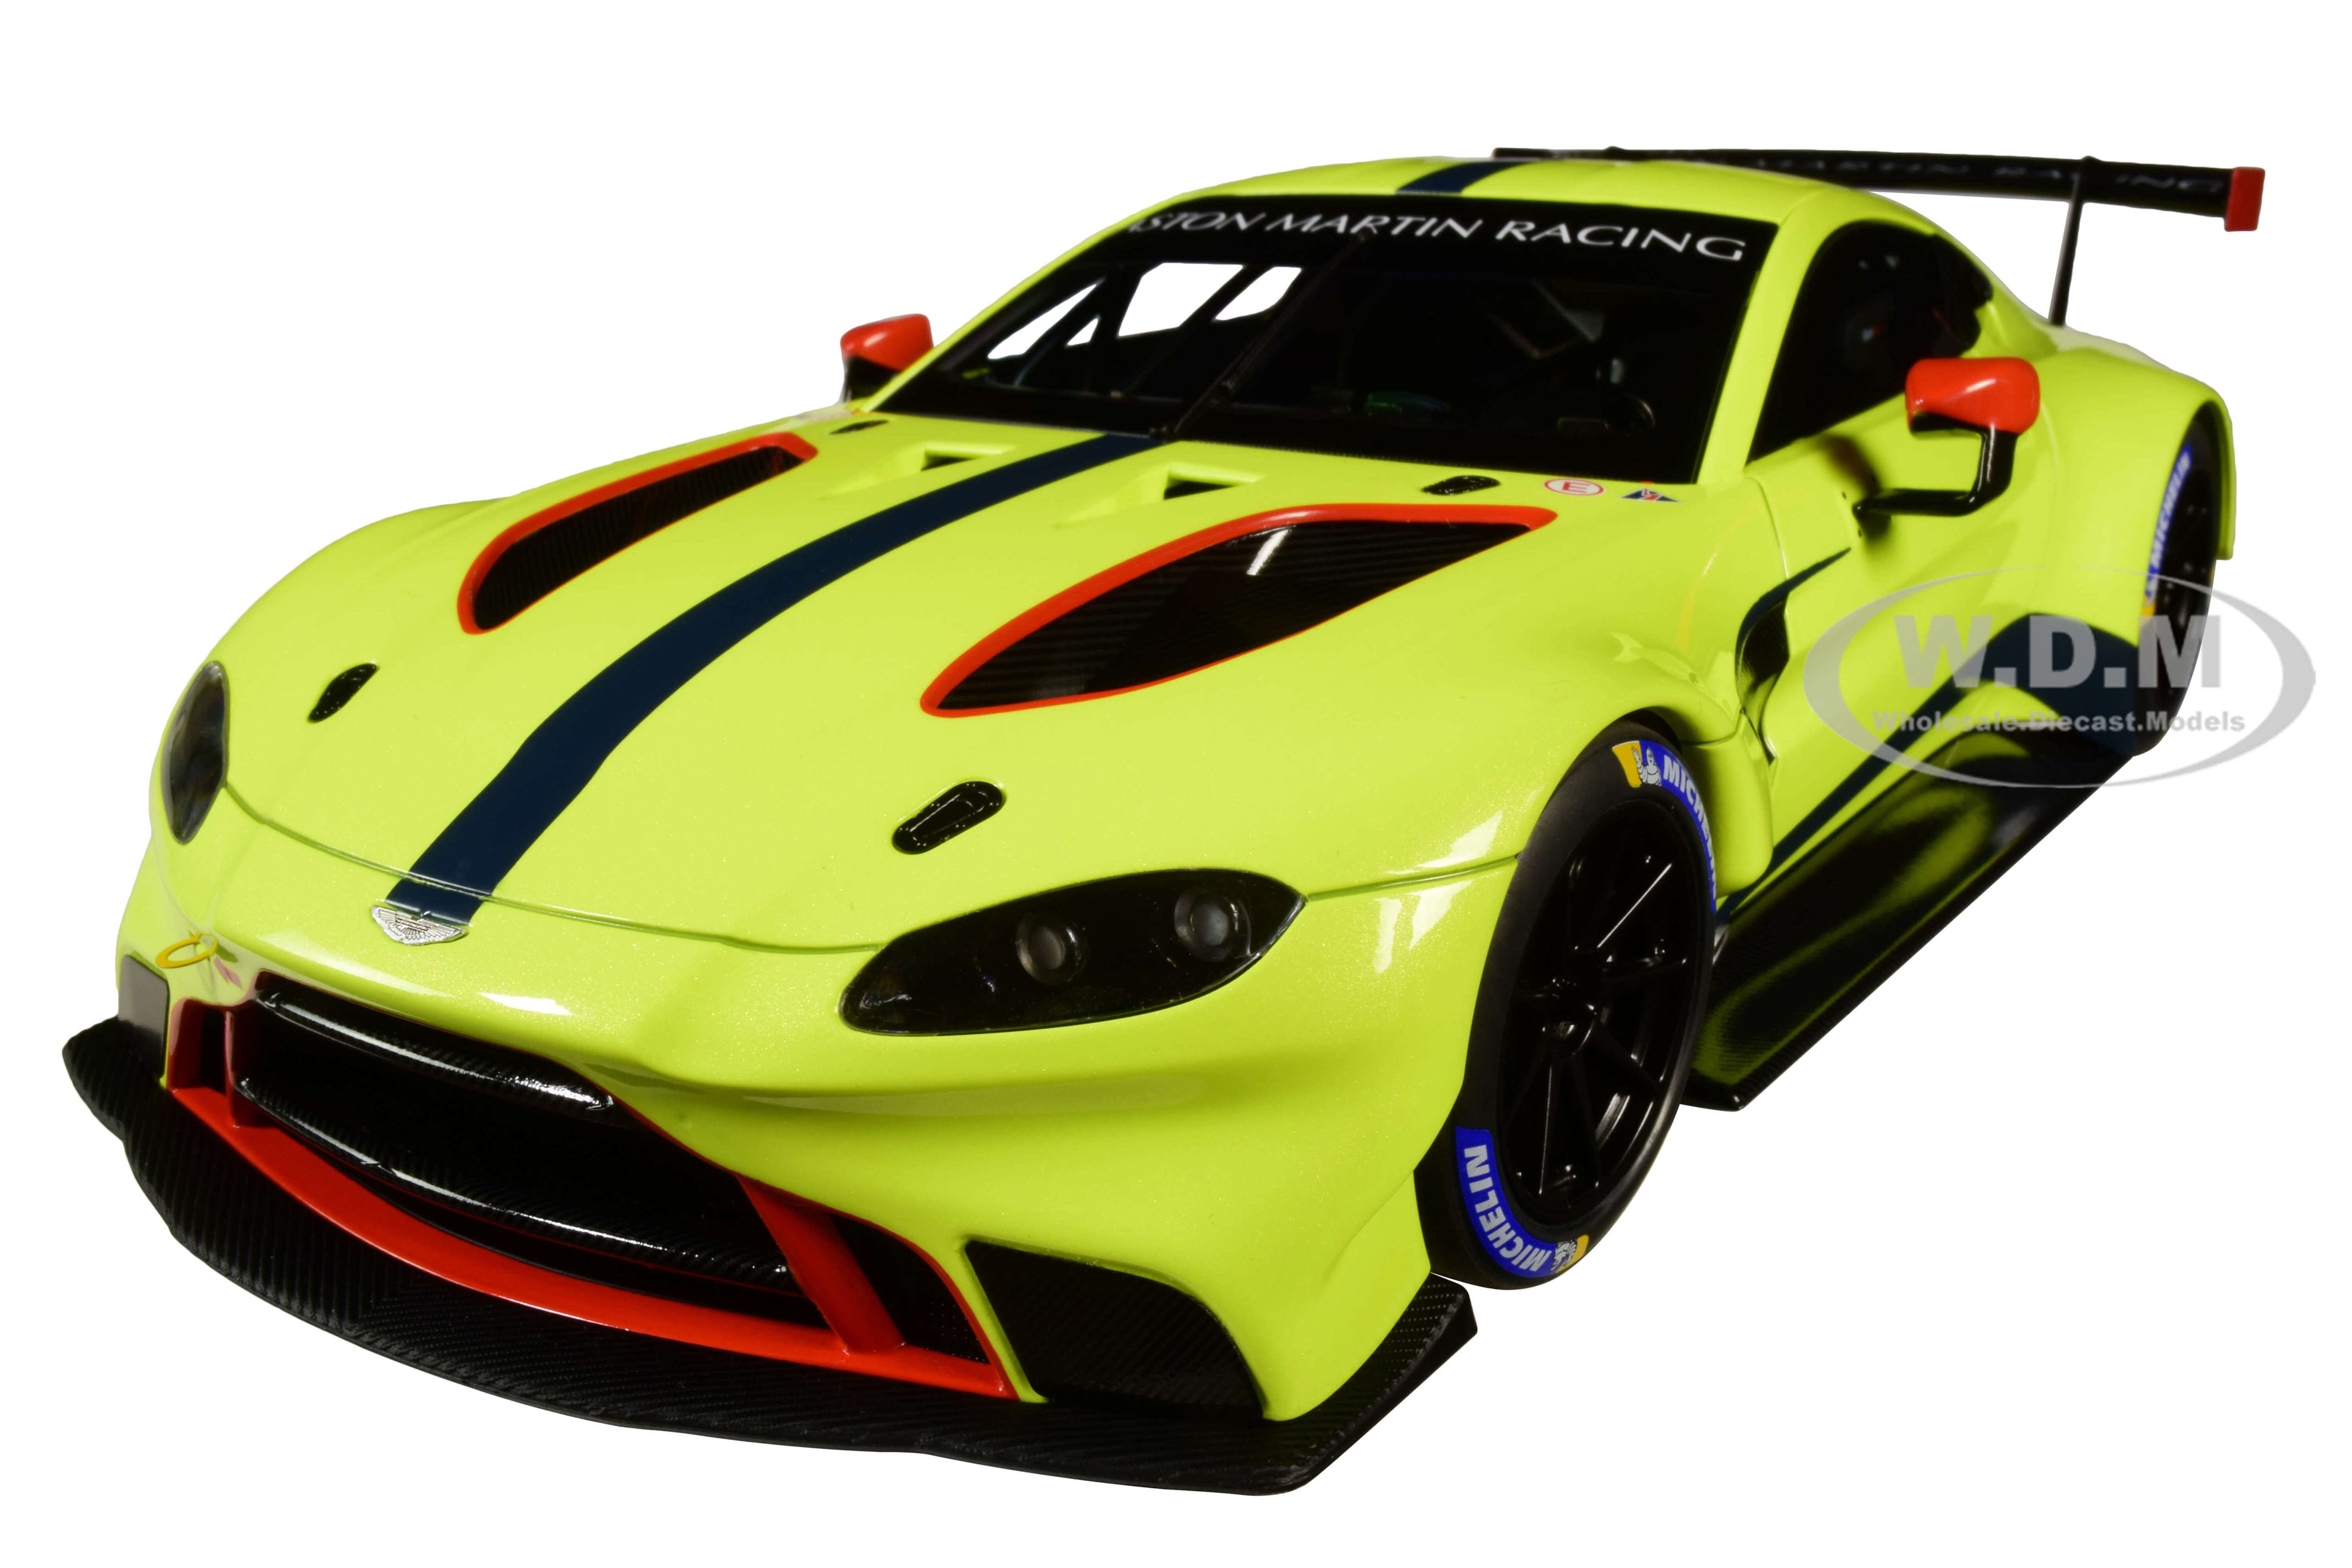 2018 Aston Martin Vantage GTE Le Mans PRO Presentation Car Lemon Green Metallic with Carbon and Red Accents "Aston Martin Racing" 1/18 Model Car by A